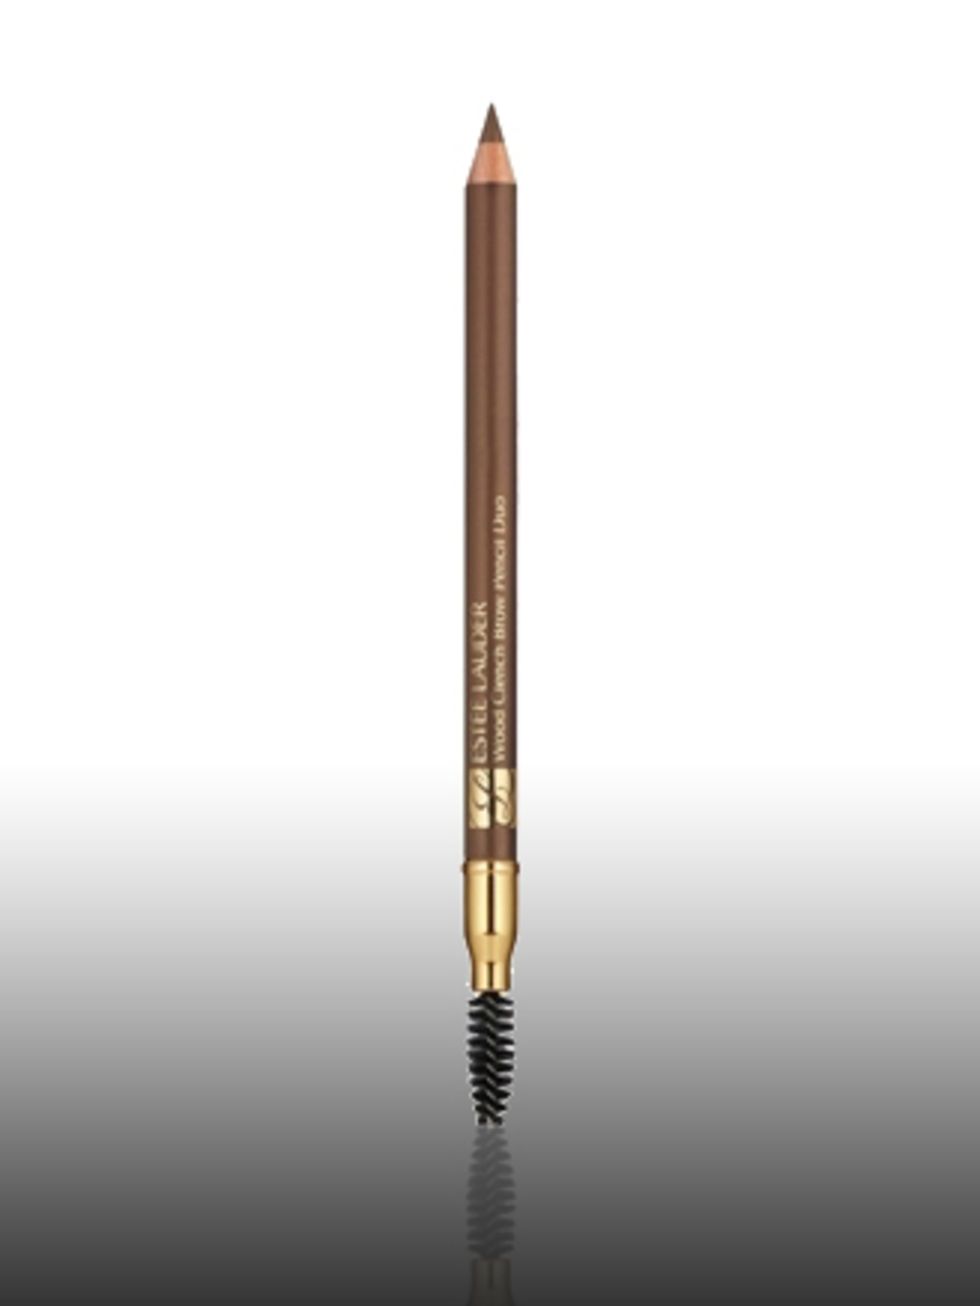 <p>Brow Shaping Pencil, £12.50 by <a href="http://www.esteelauder.co.uk/templates/products/sp_shaded.tmpl?CATEGORY_ID=CAT1023&amp;PRODUCT_ID=PROD89441">Estee Lauder</a> </p>